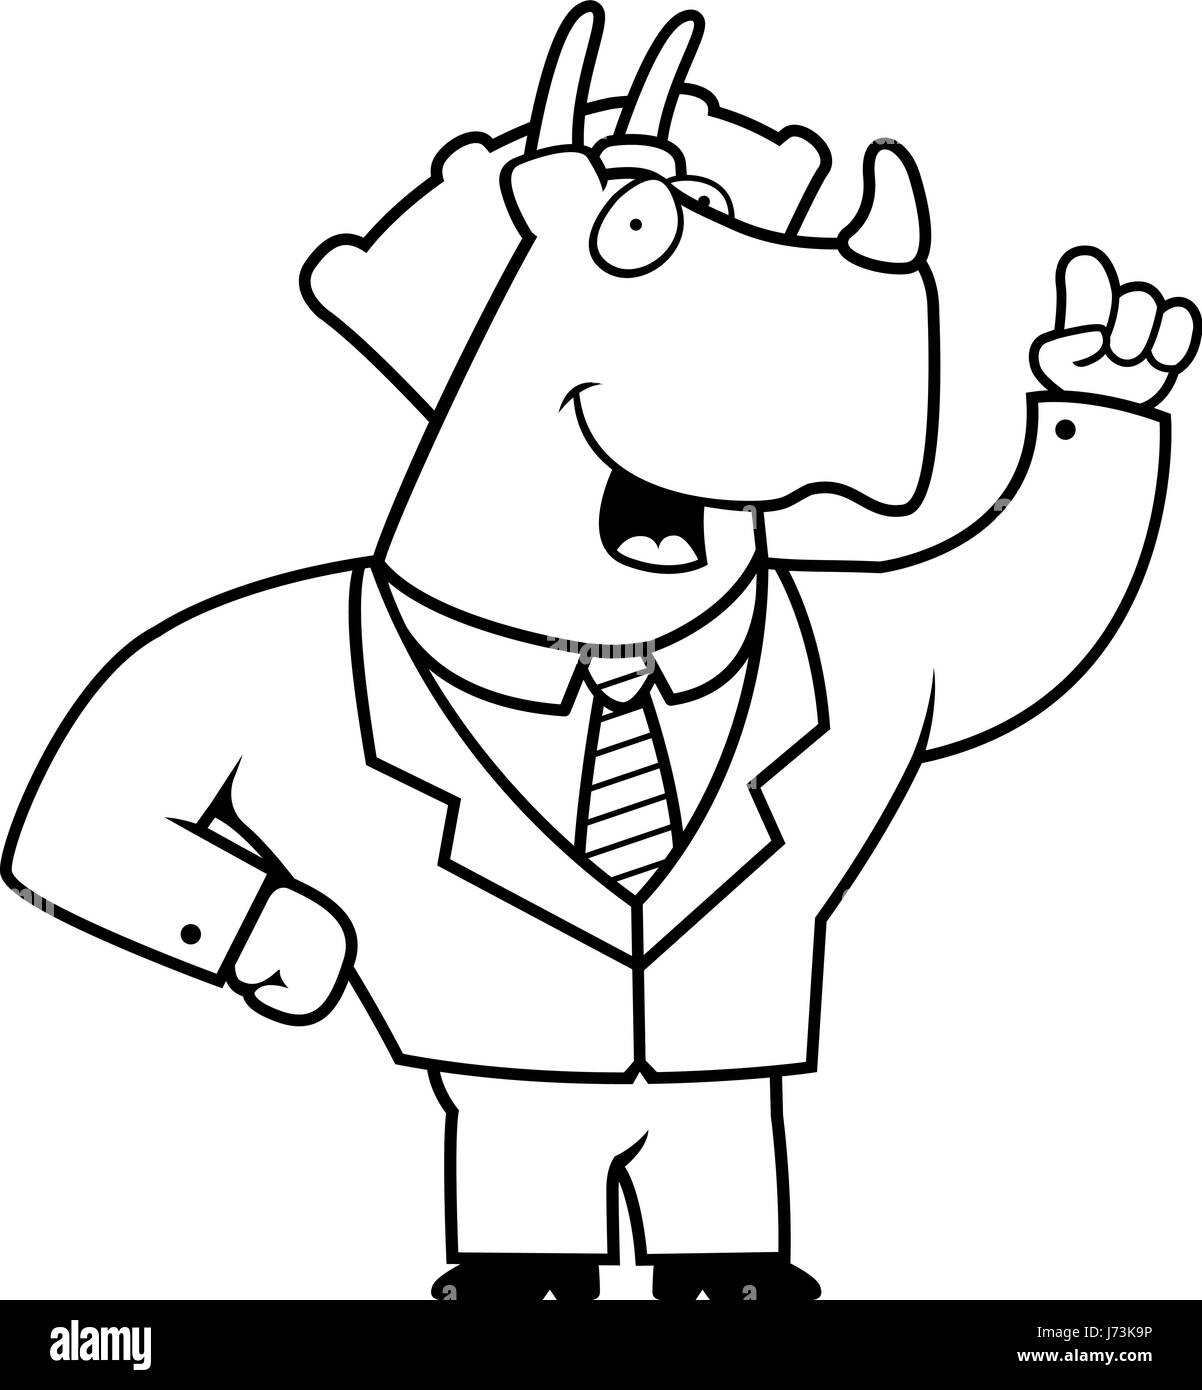 A happy cartoon dinosaur in a business suit. Stock Vector